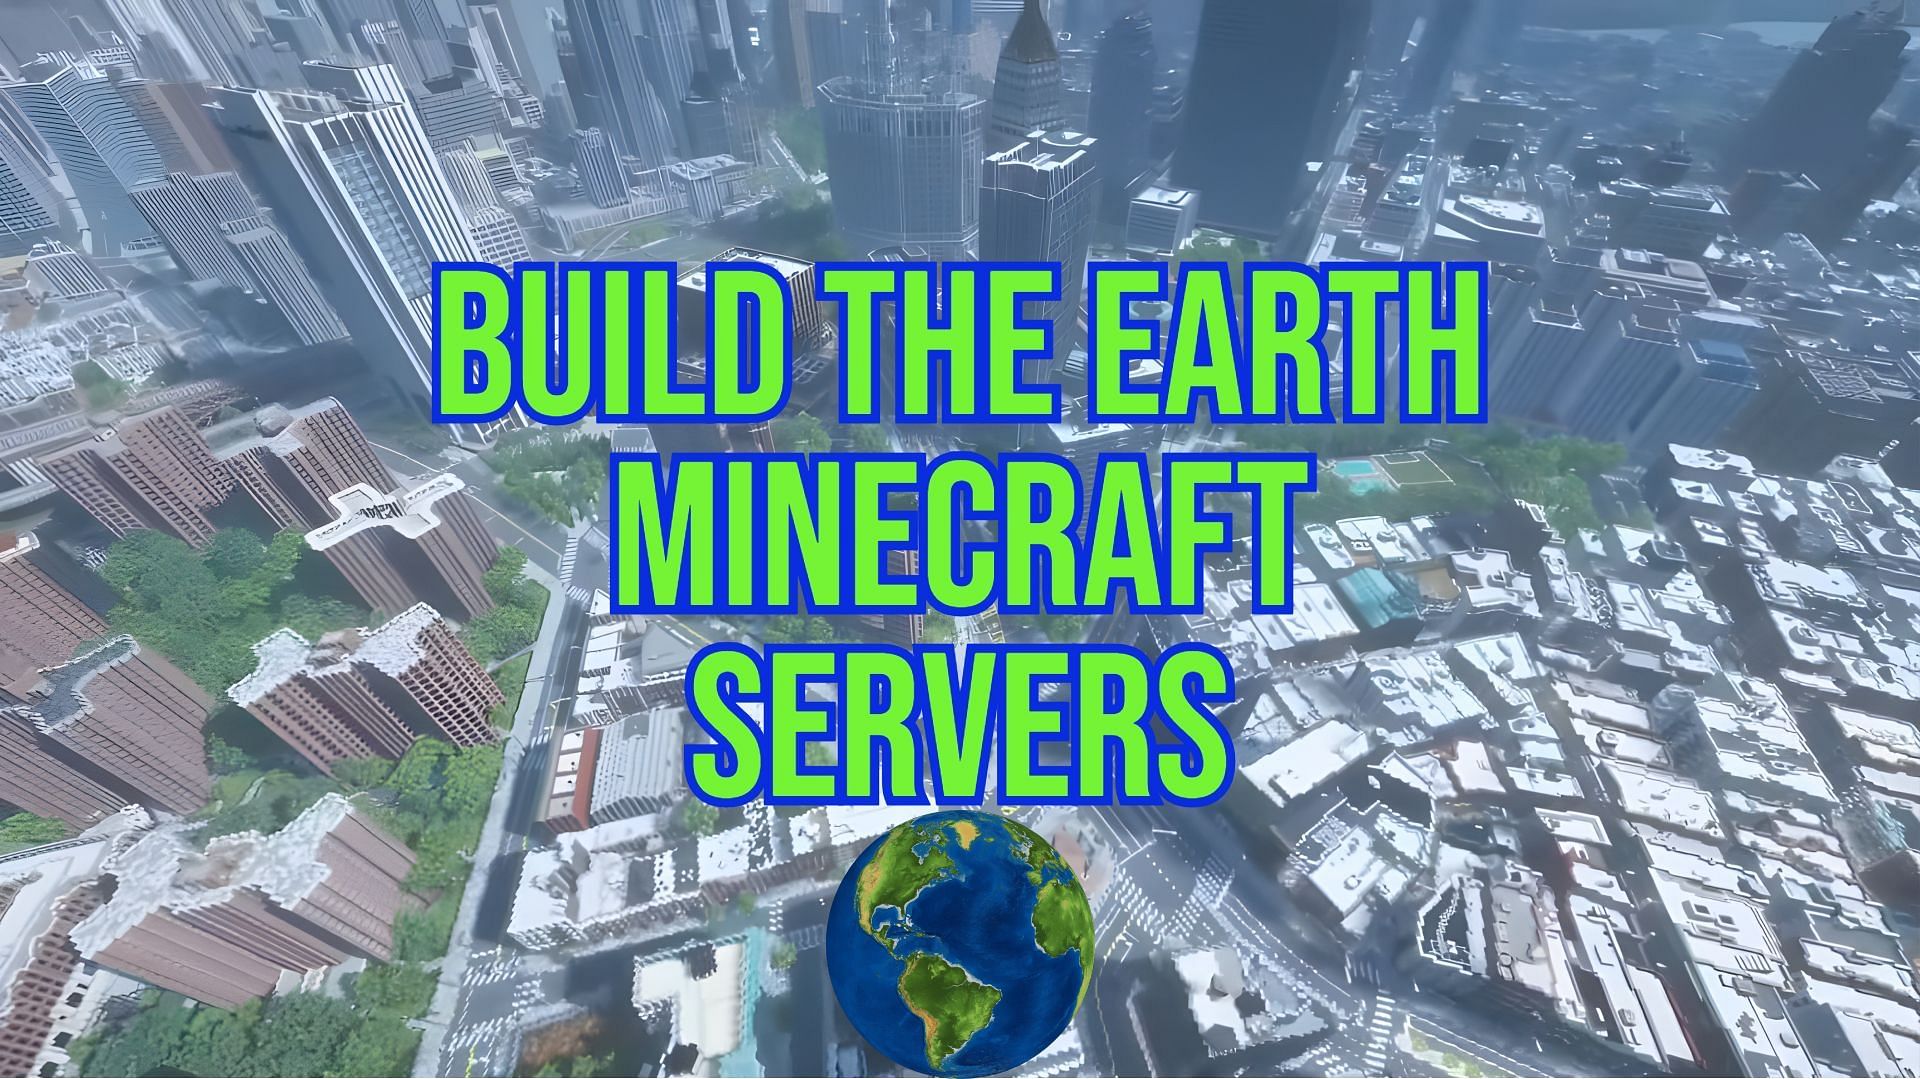 Minecraft servers where you participate in recreating the Earth is truly epic to see (Image via Mojang/Sportskeeda)